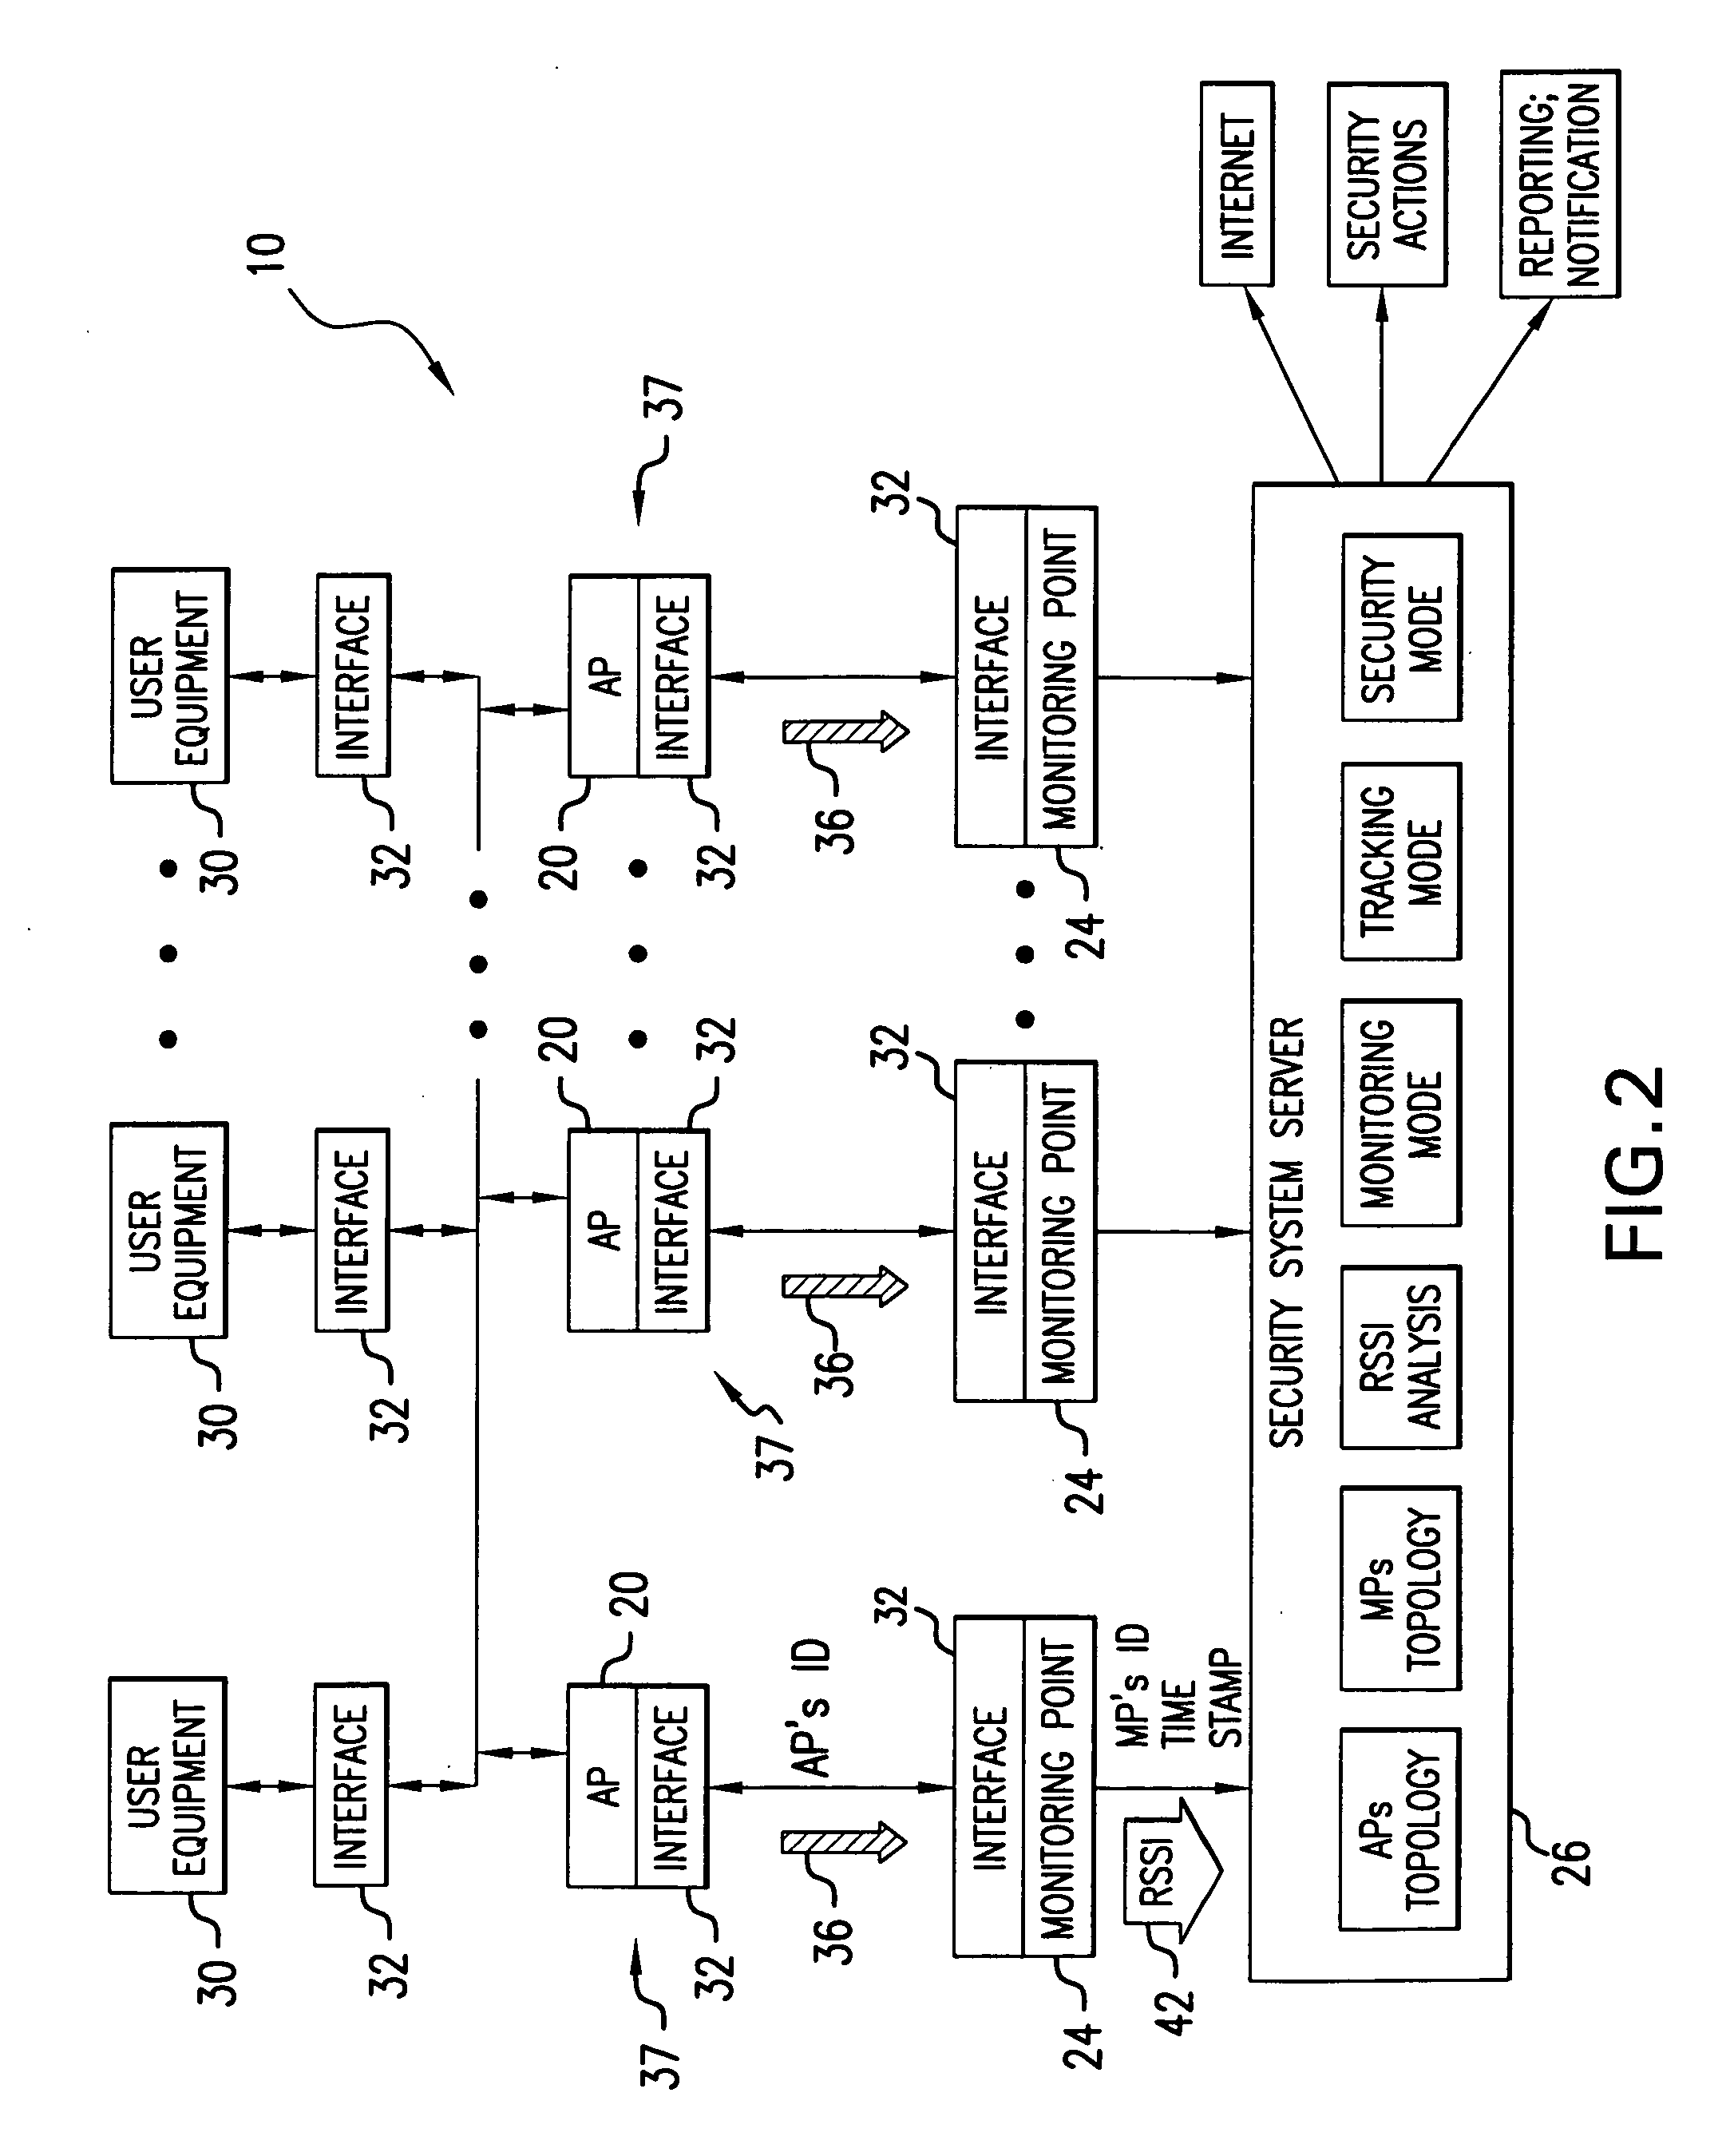 Method and system for providing physical security in an area of interest